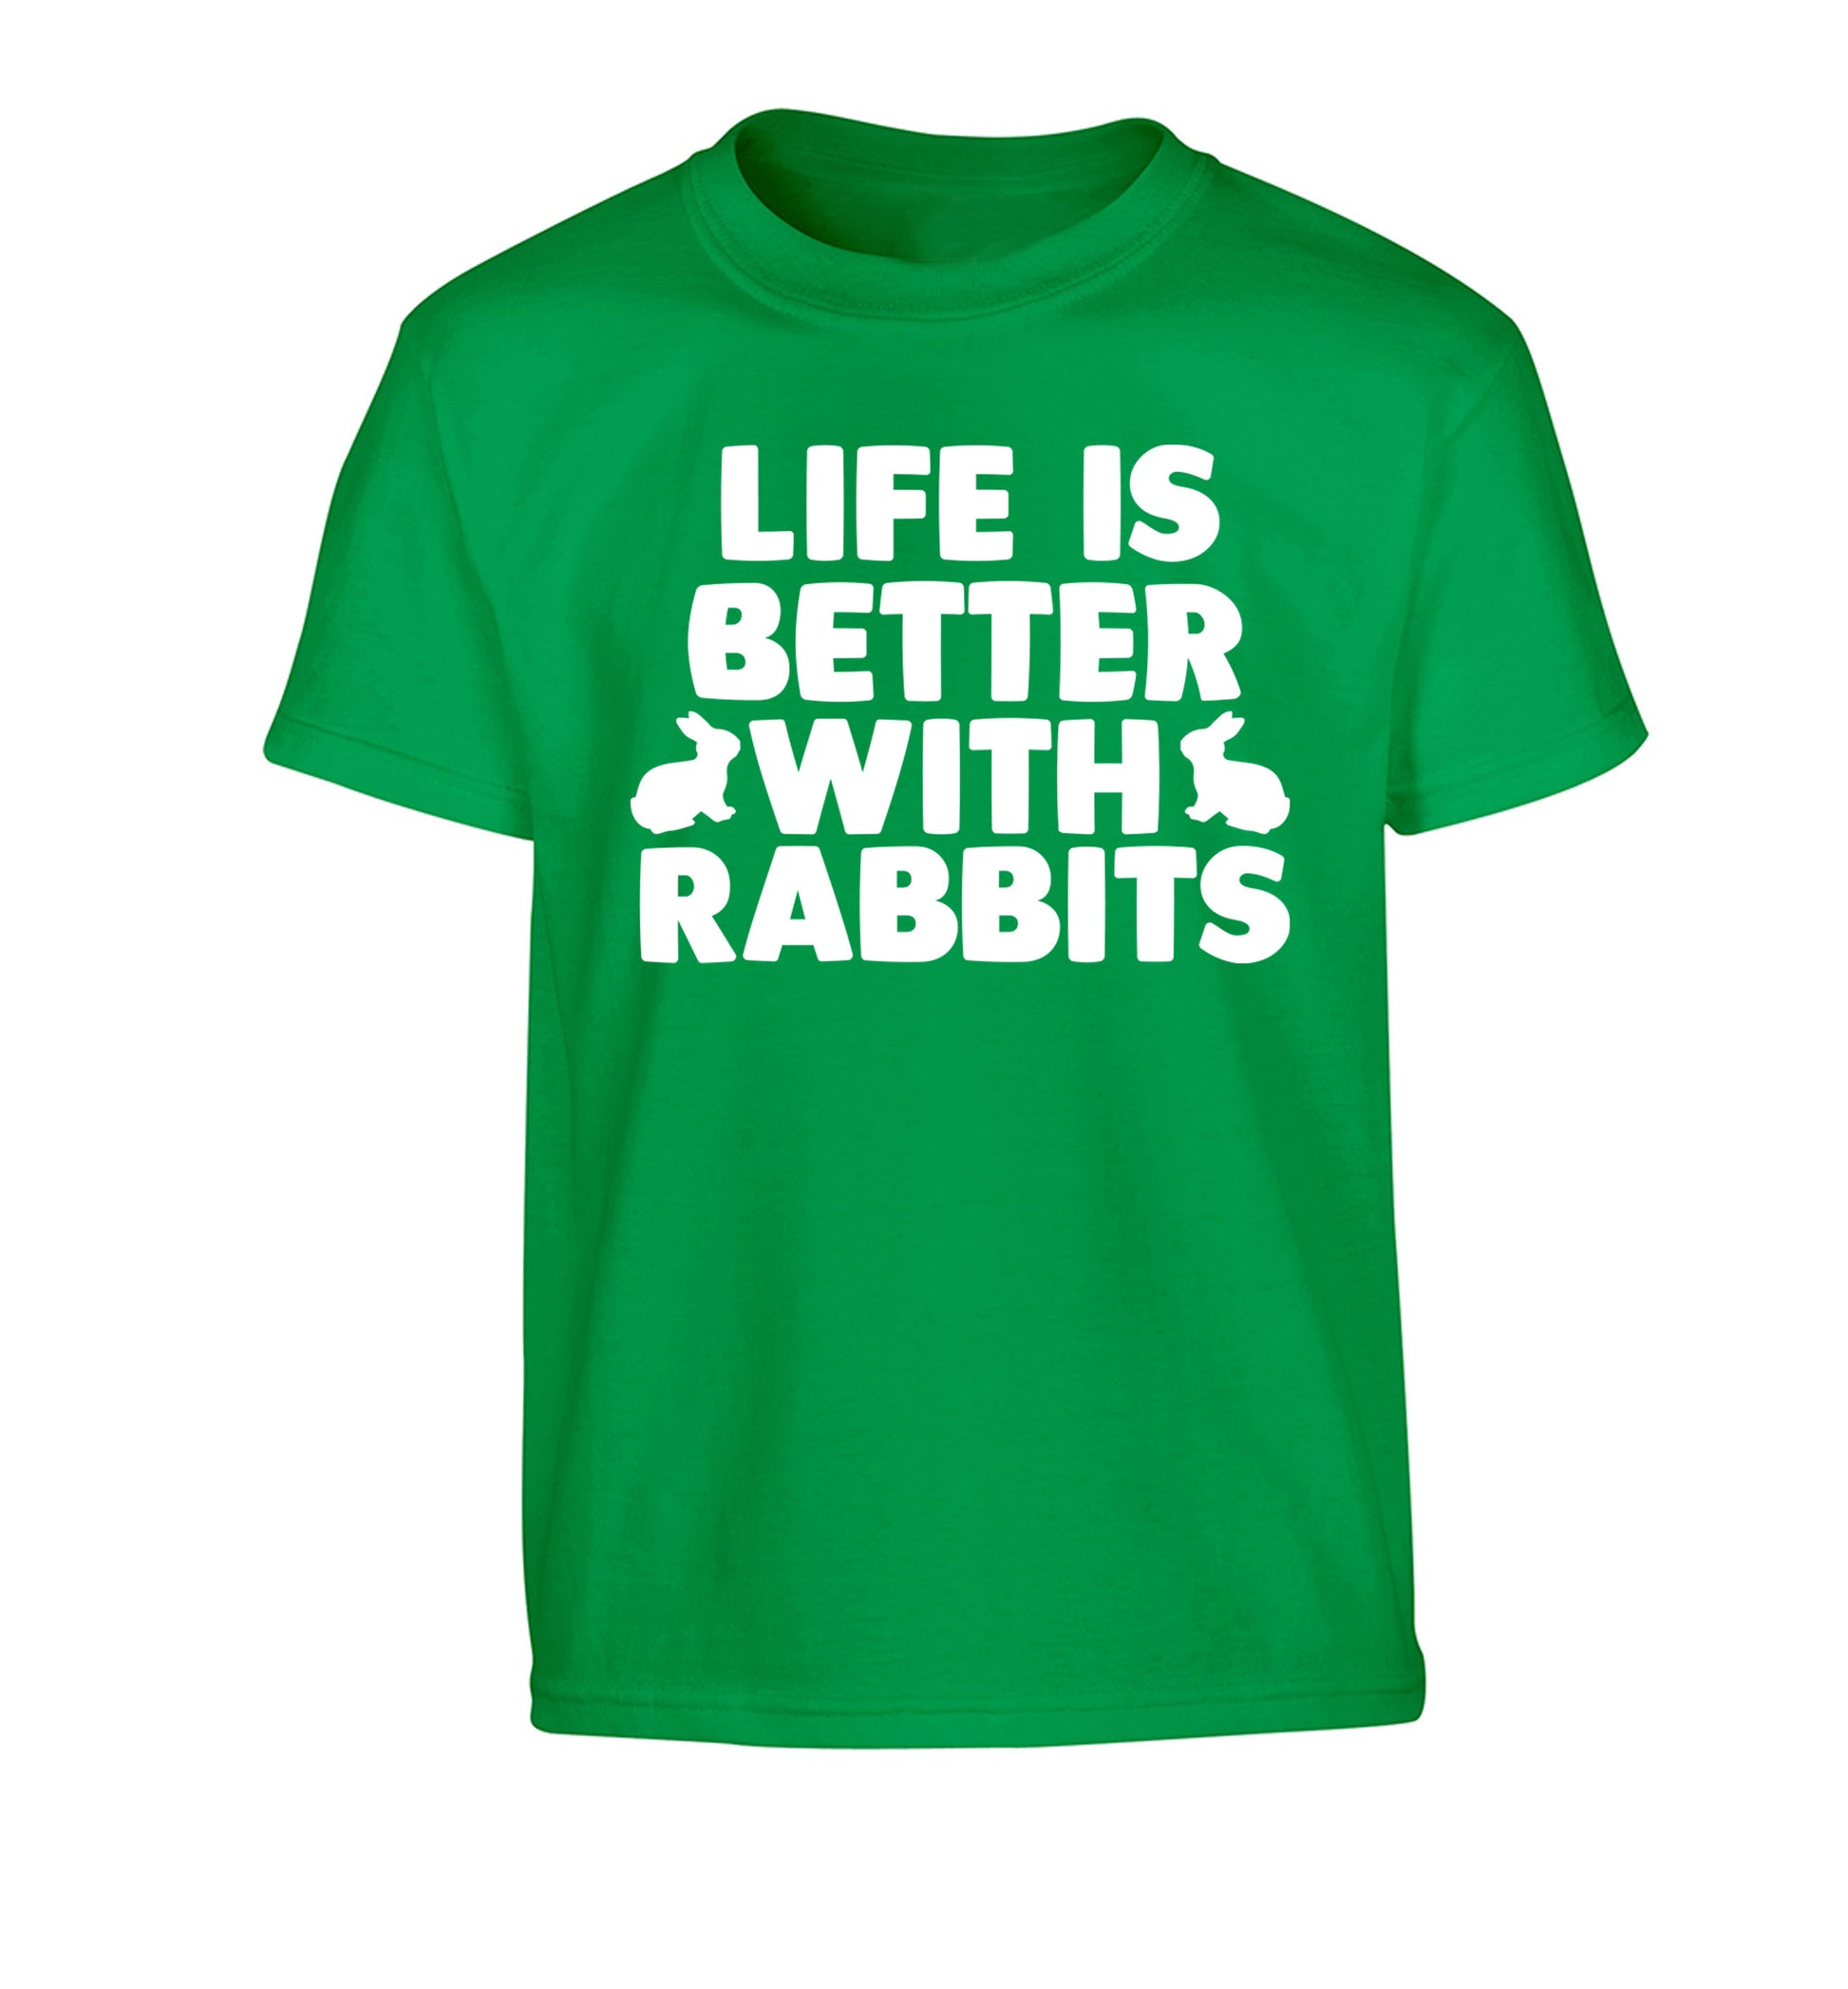 Life is better with rabbits Children's green Tshirt 12-14 Years